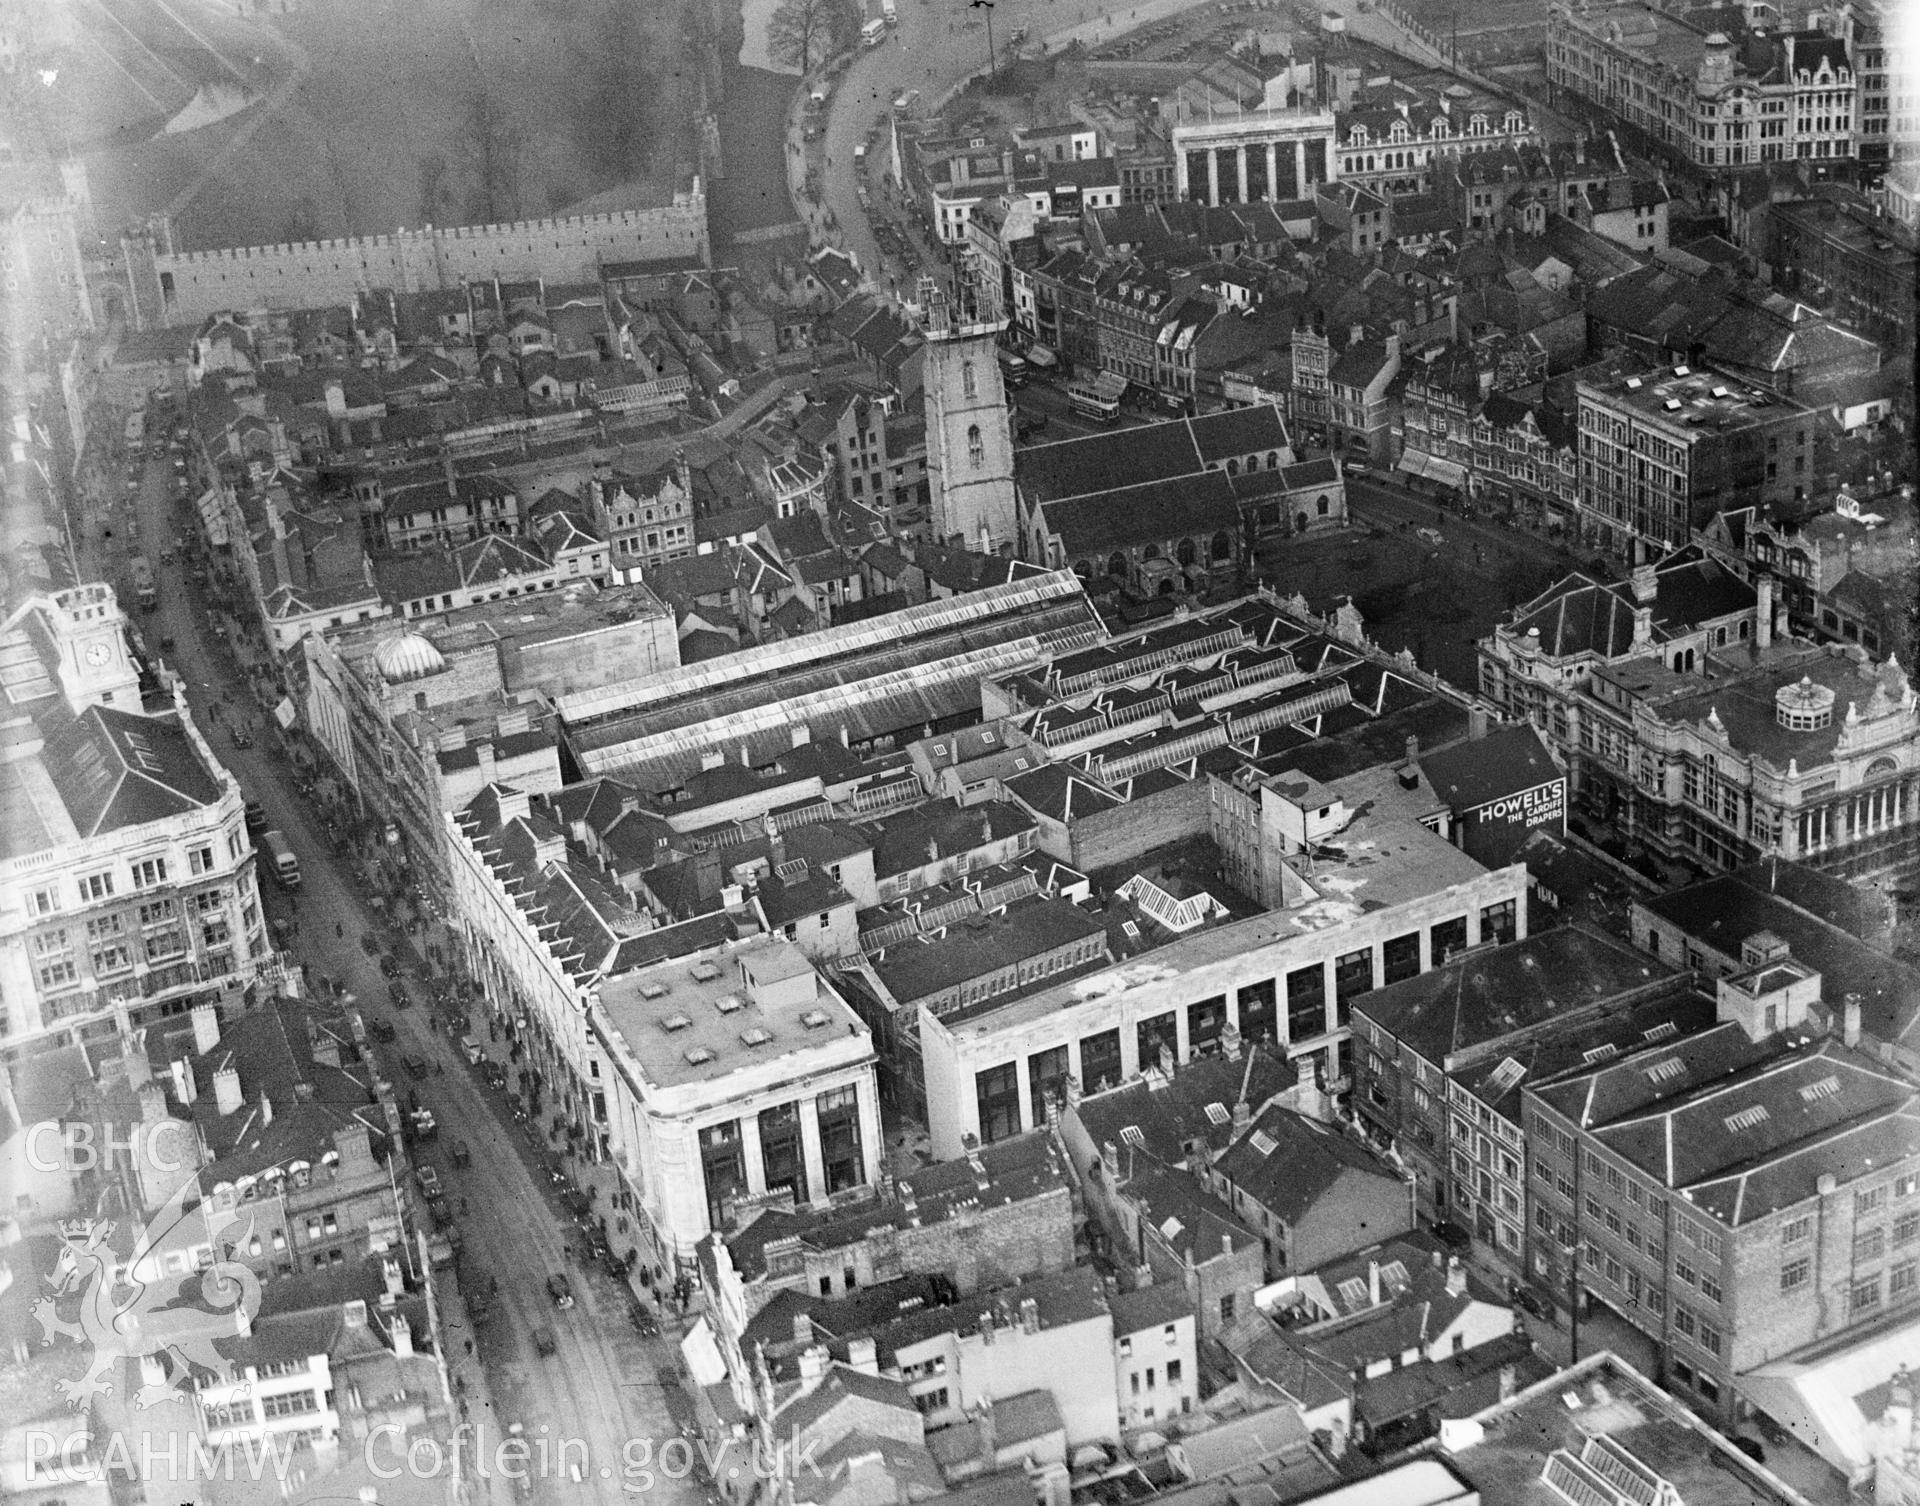 View of central Cardiff, showing James Howell & Co. Ltd., oblique aerial view. 5?x4? black and white glass plate negative.